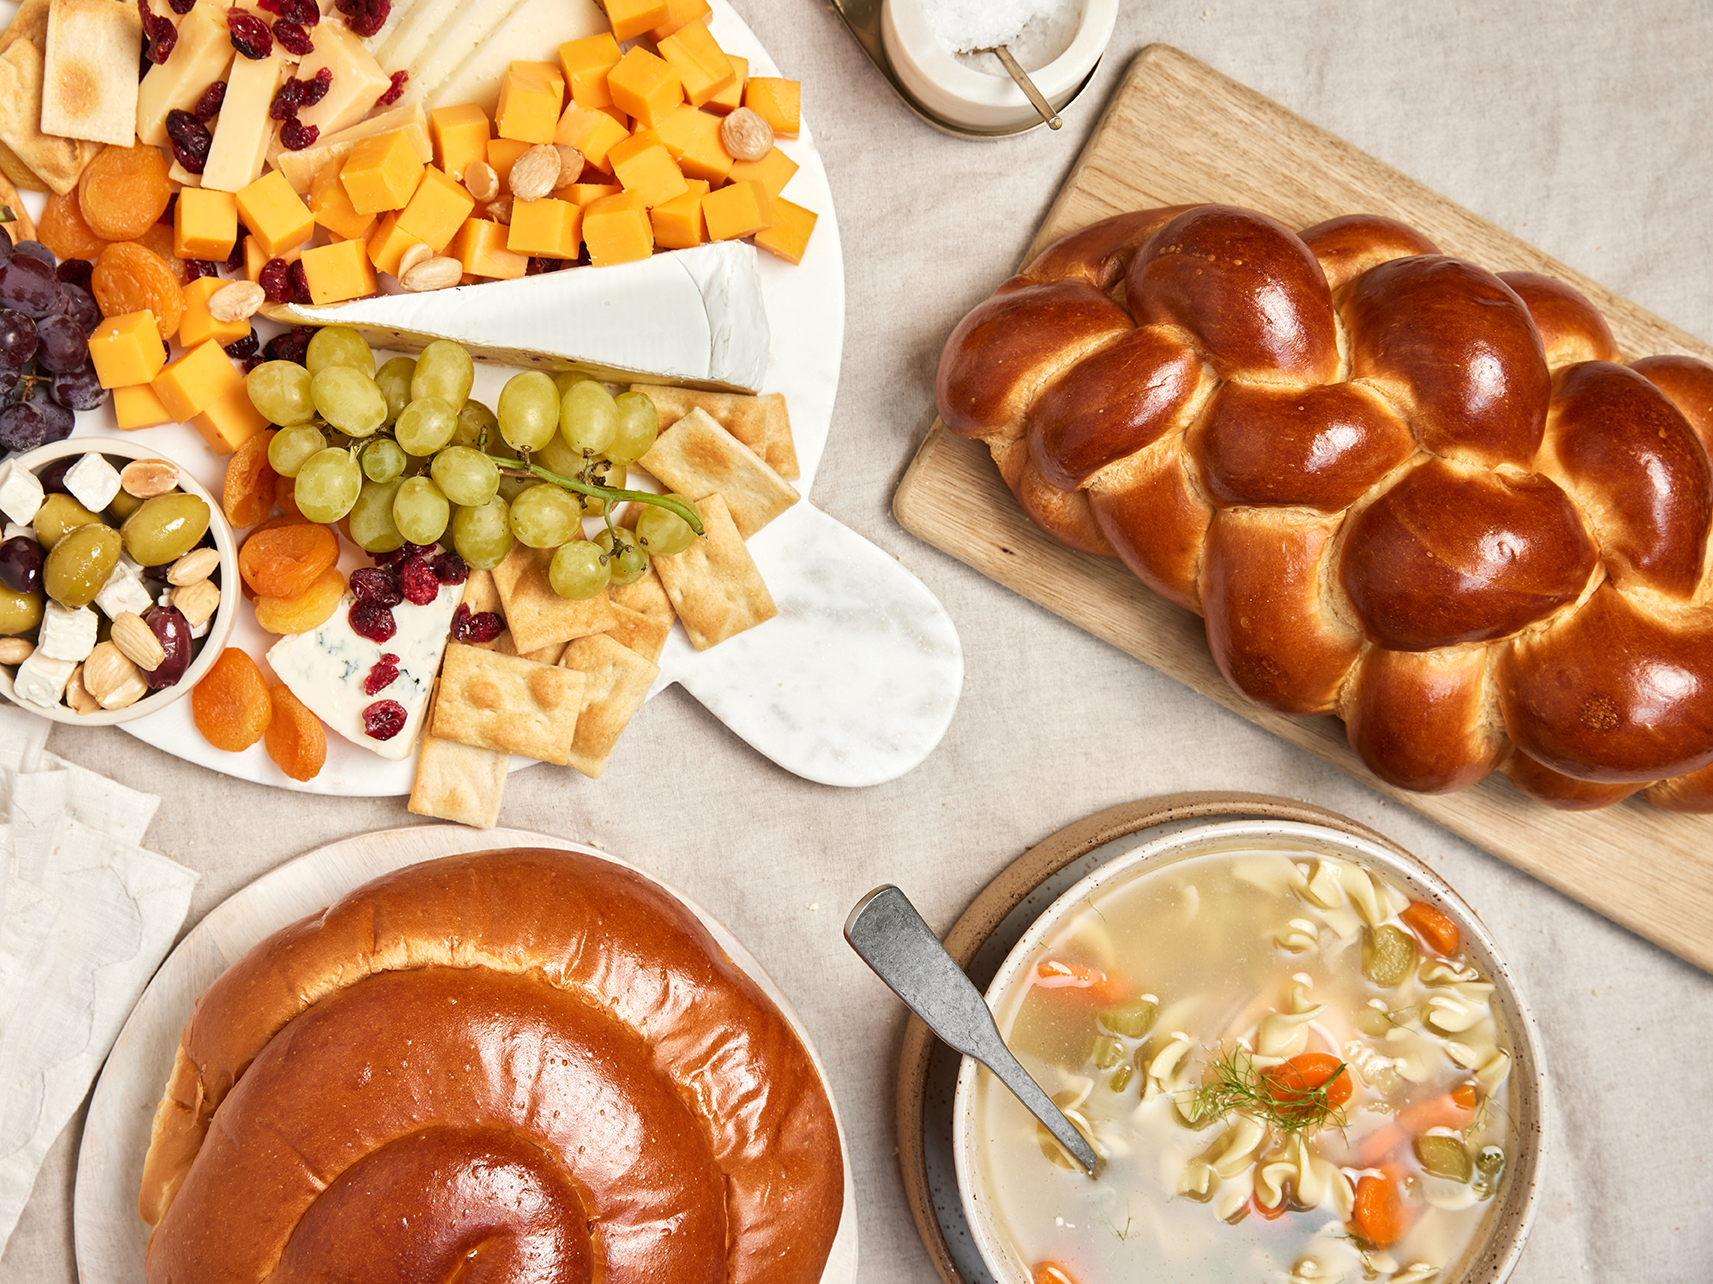 A Yom Kippur break fast of challah, soup, fruits, and cheese.